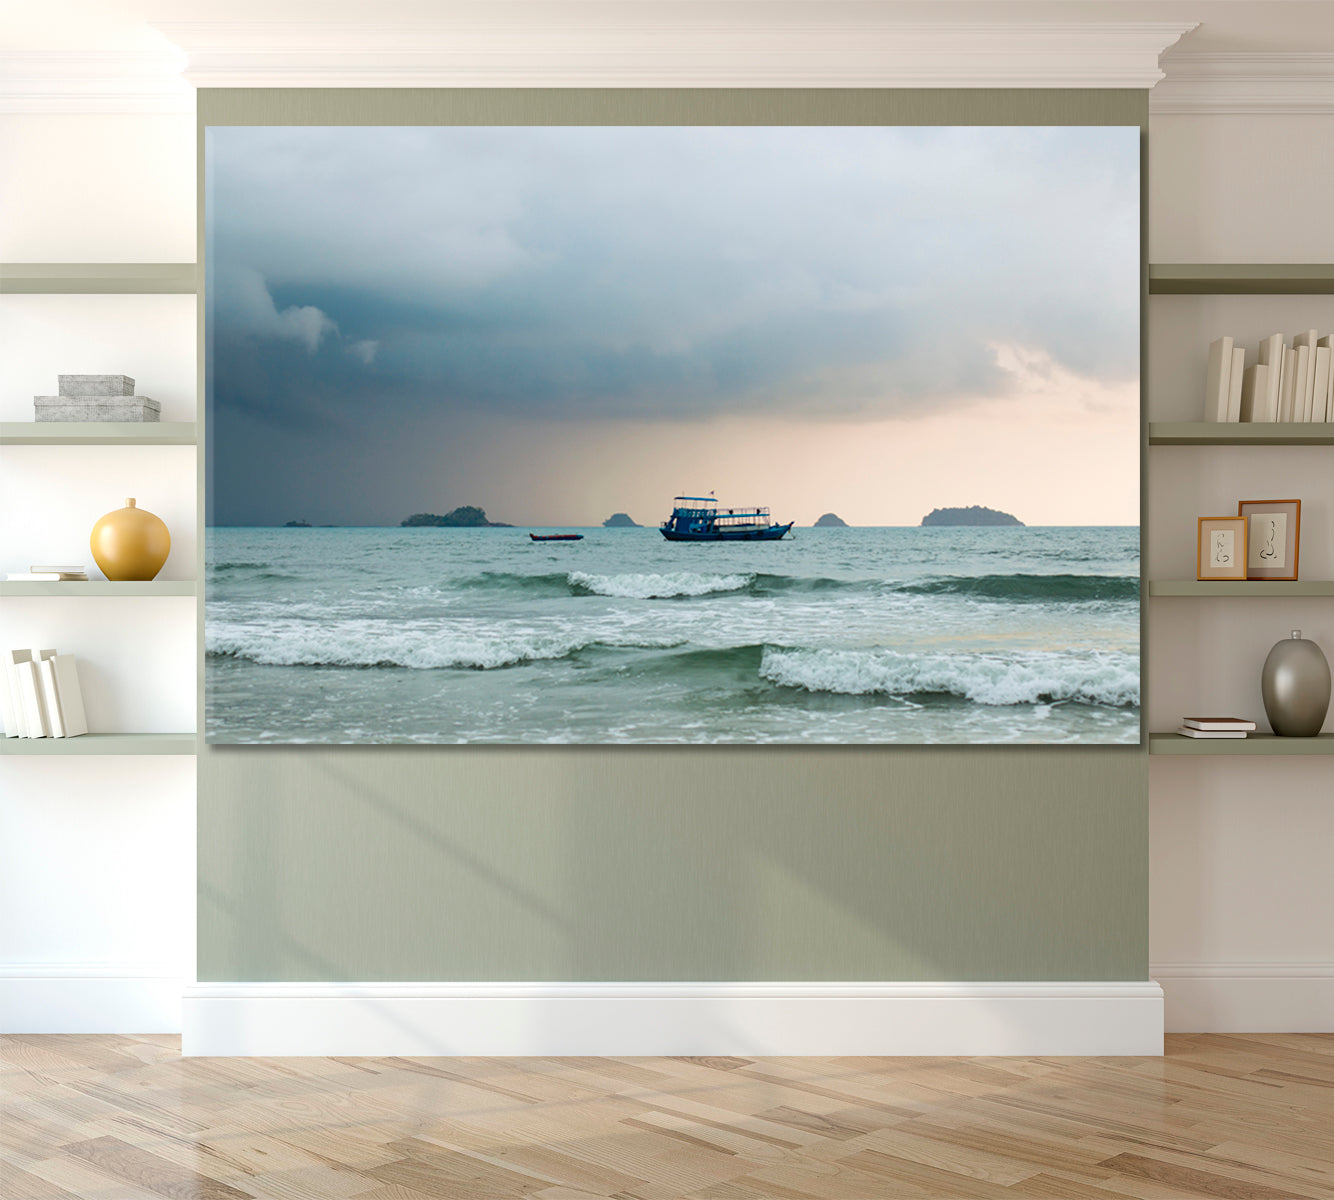 Weathered the Storm | Ship at Sea during a Storm Sailboat Ocean Waves Dark Sky Stormy Seas Skyscape Canvas Artesty 1 panel 24" x 16" 